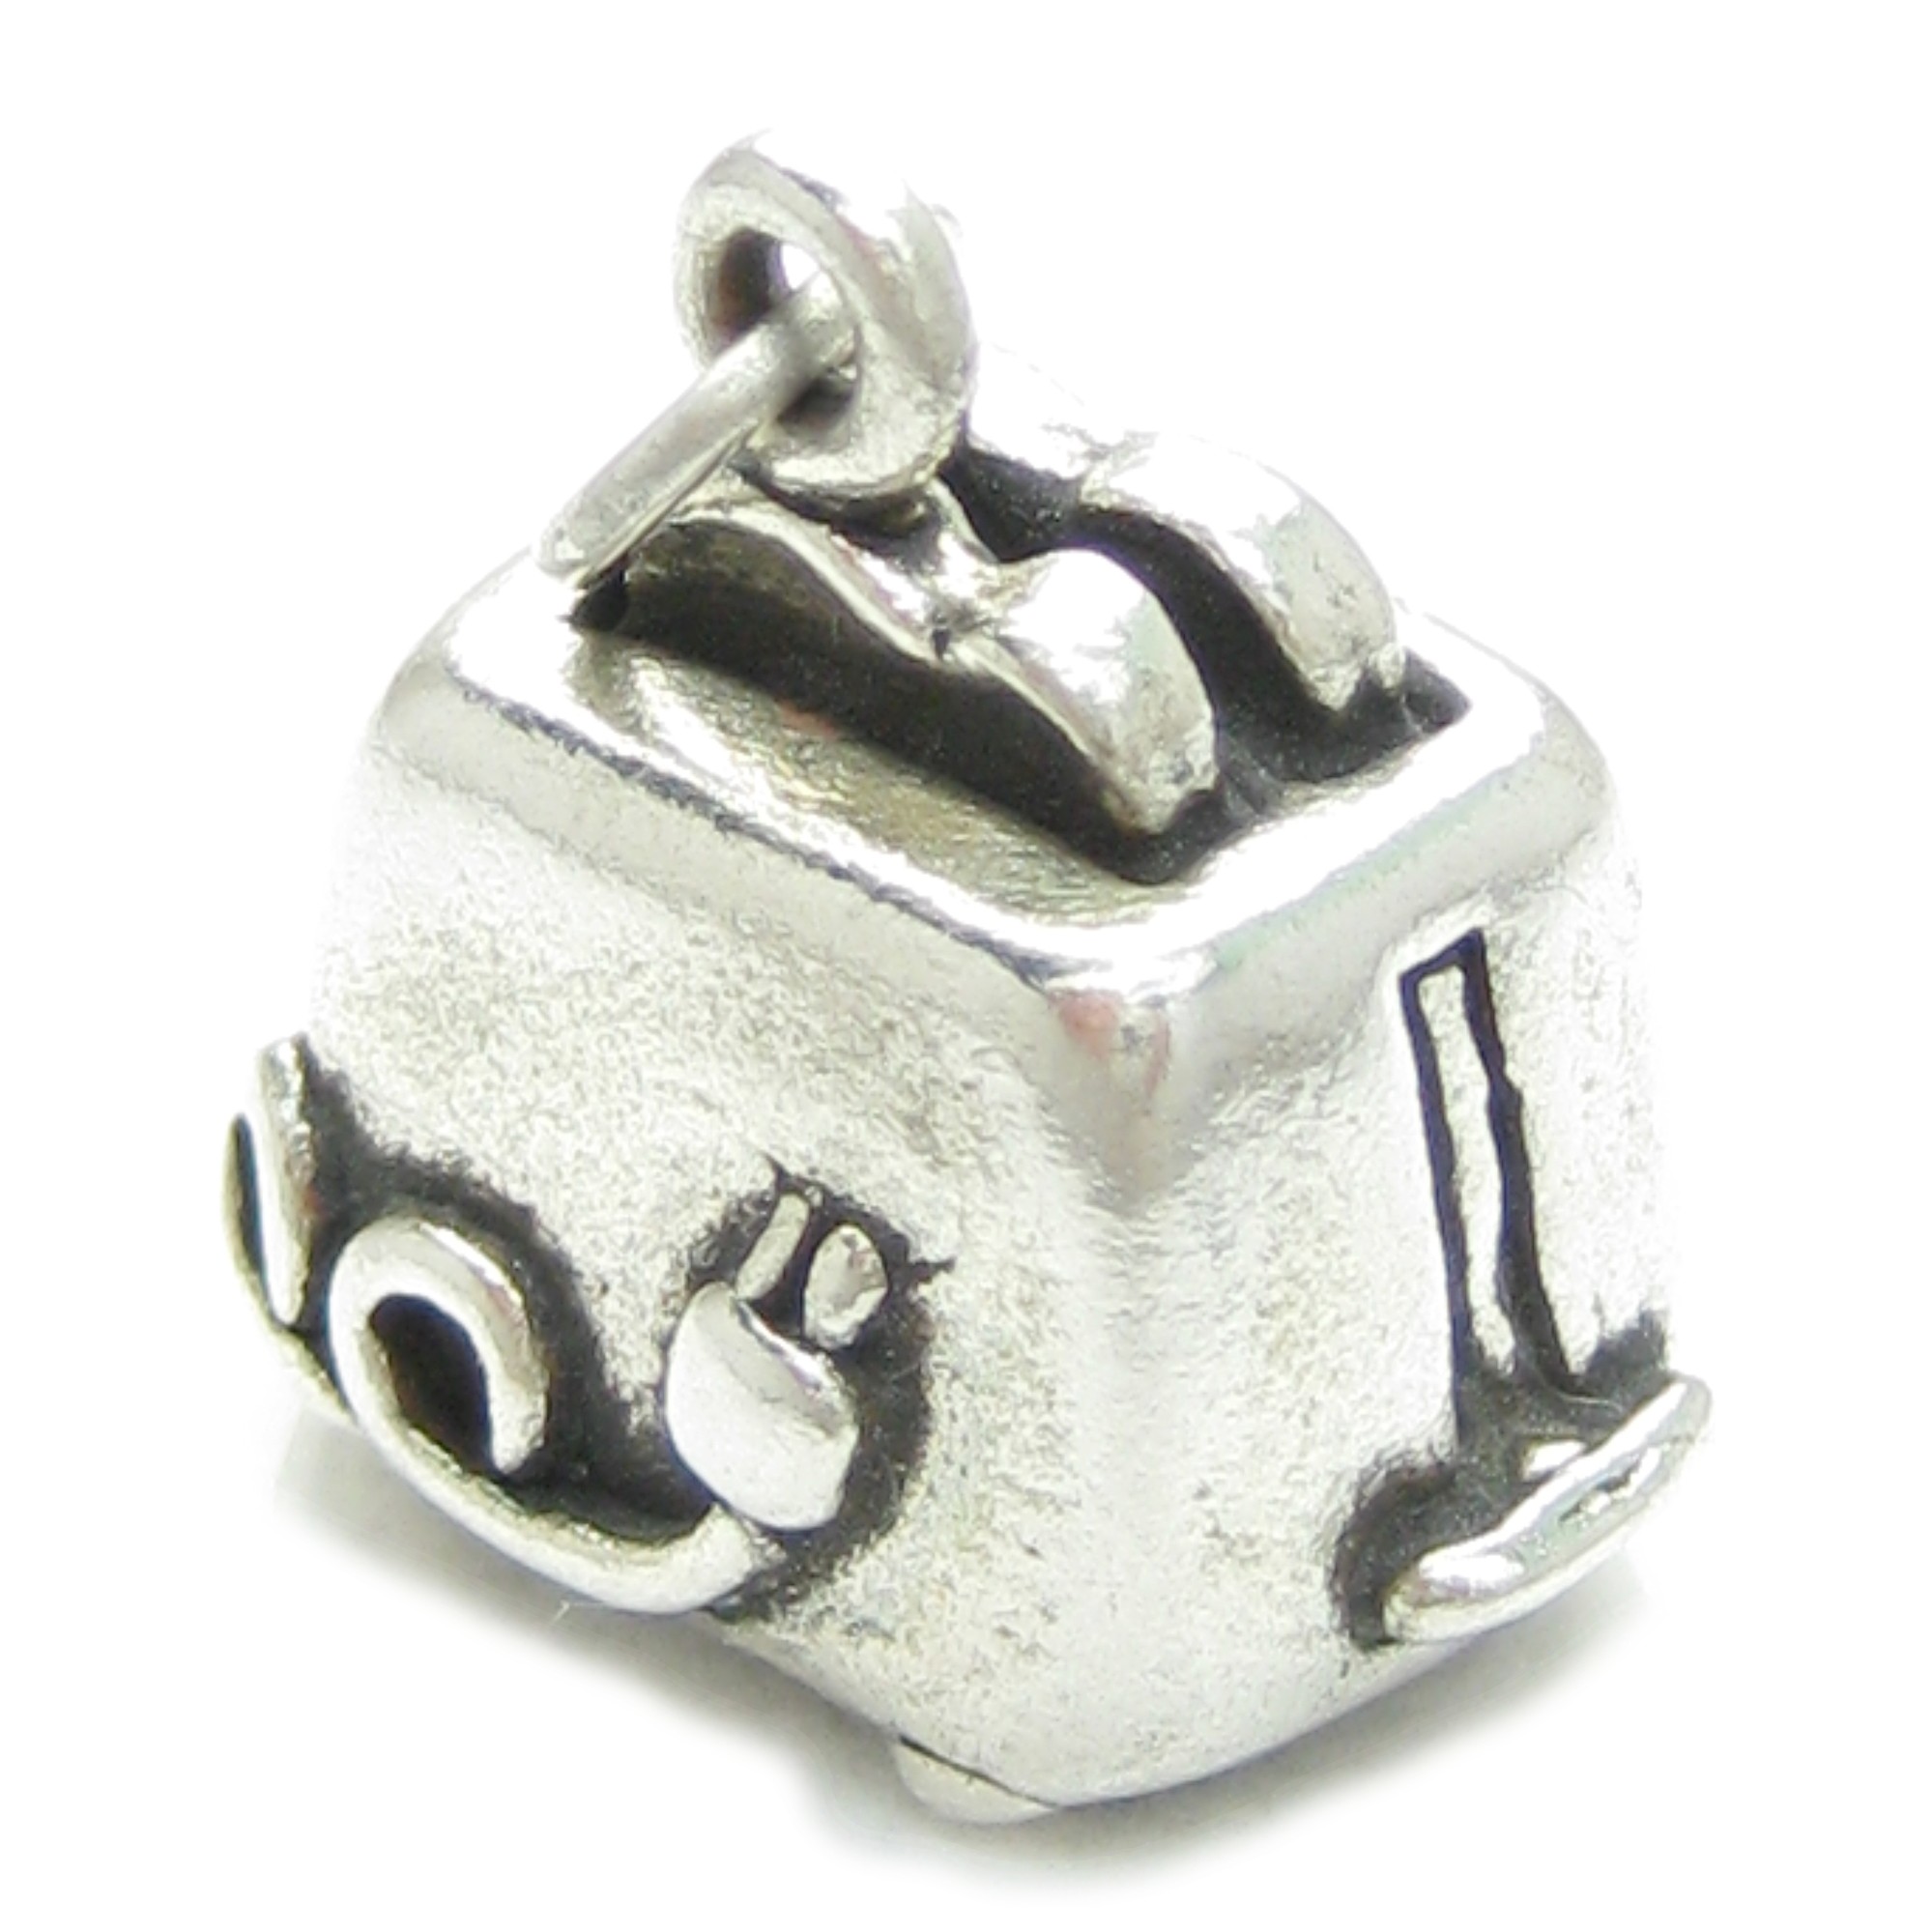 Toaster sterling silver charm .925 x 1 Toast Toasting Toastie charms